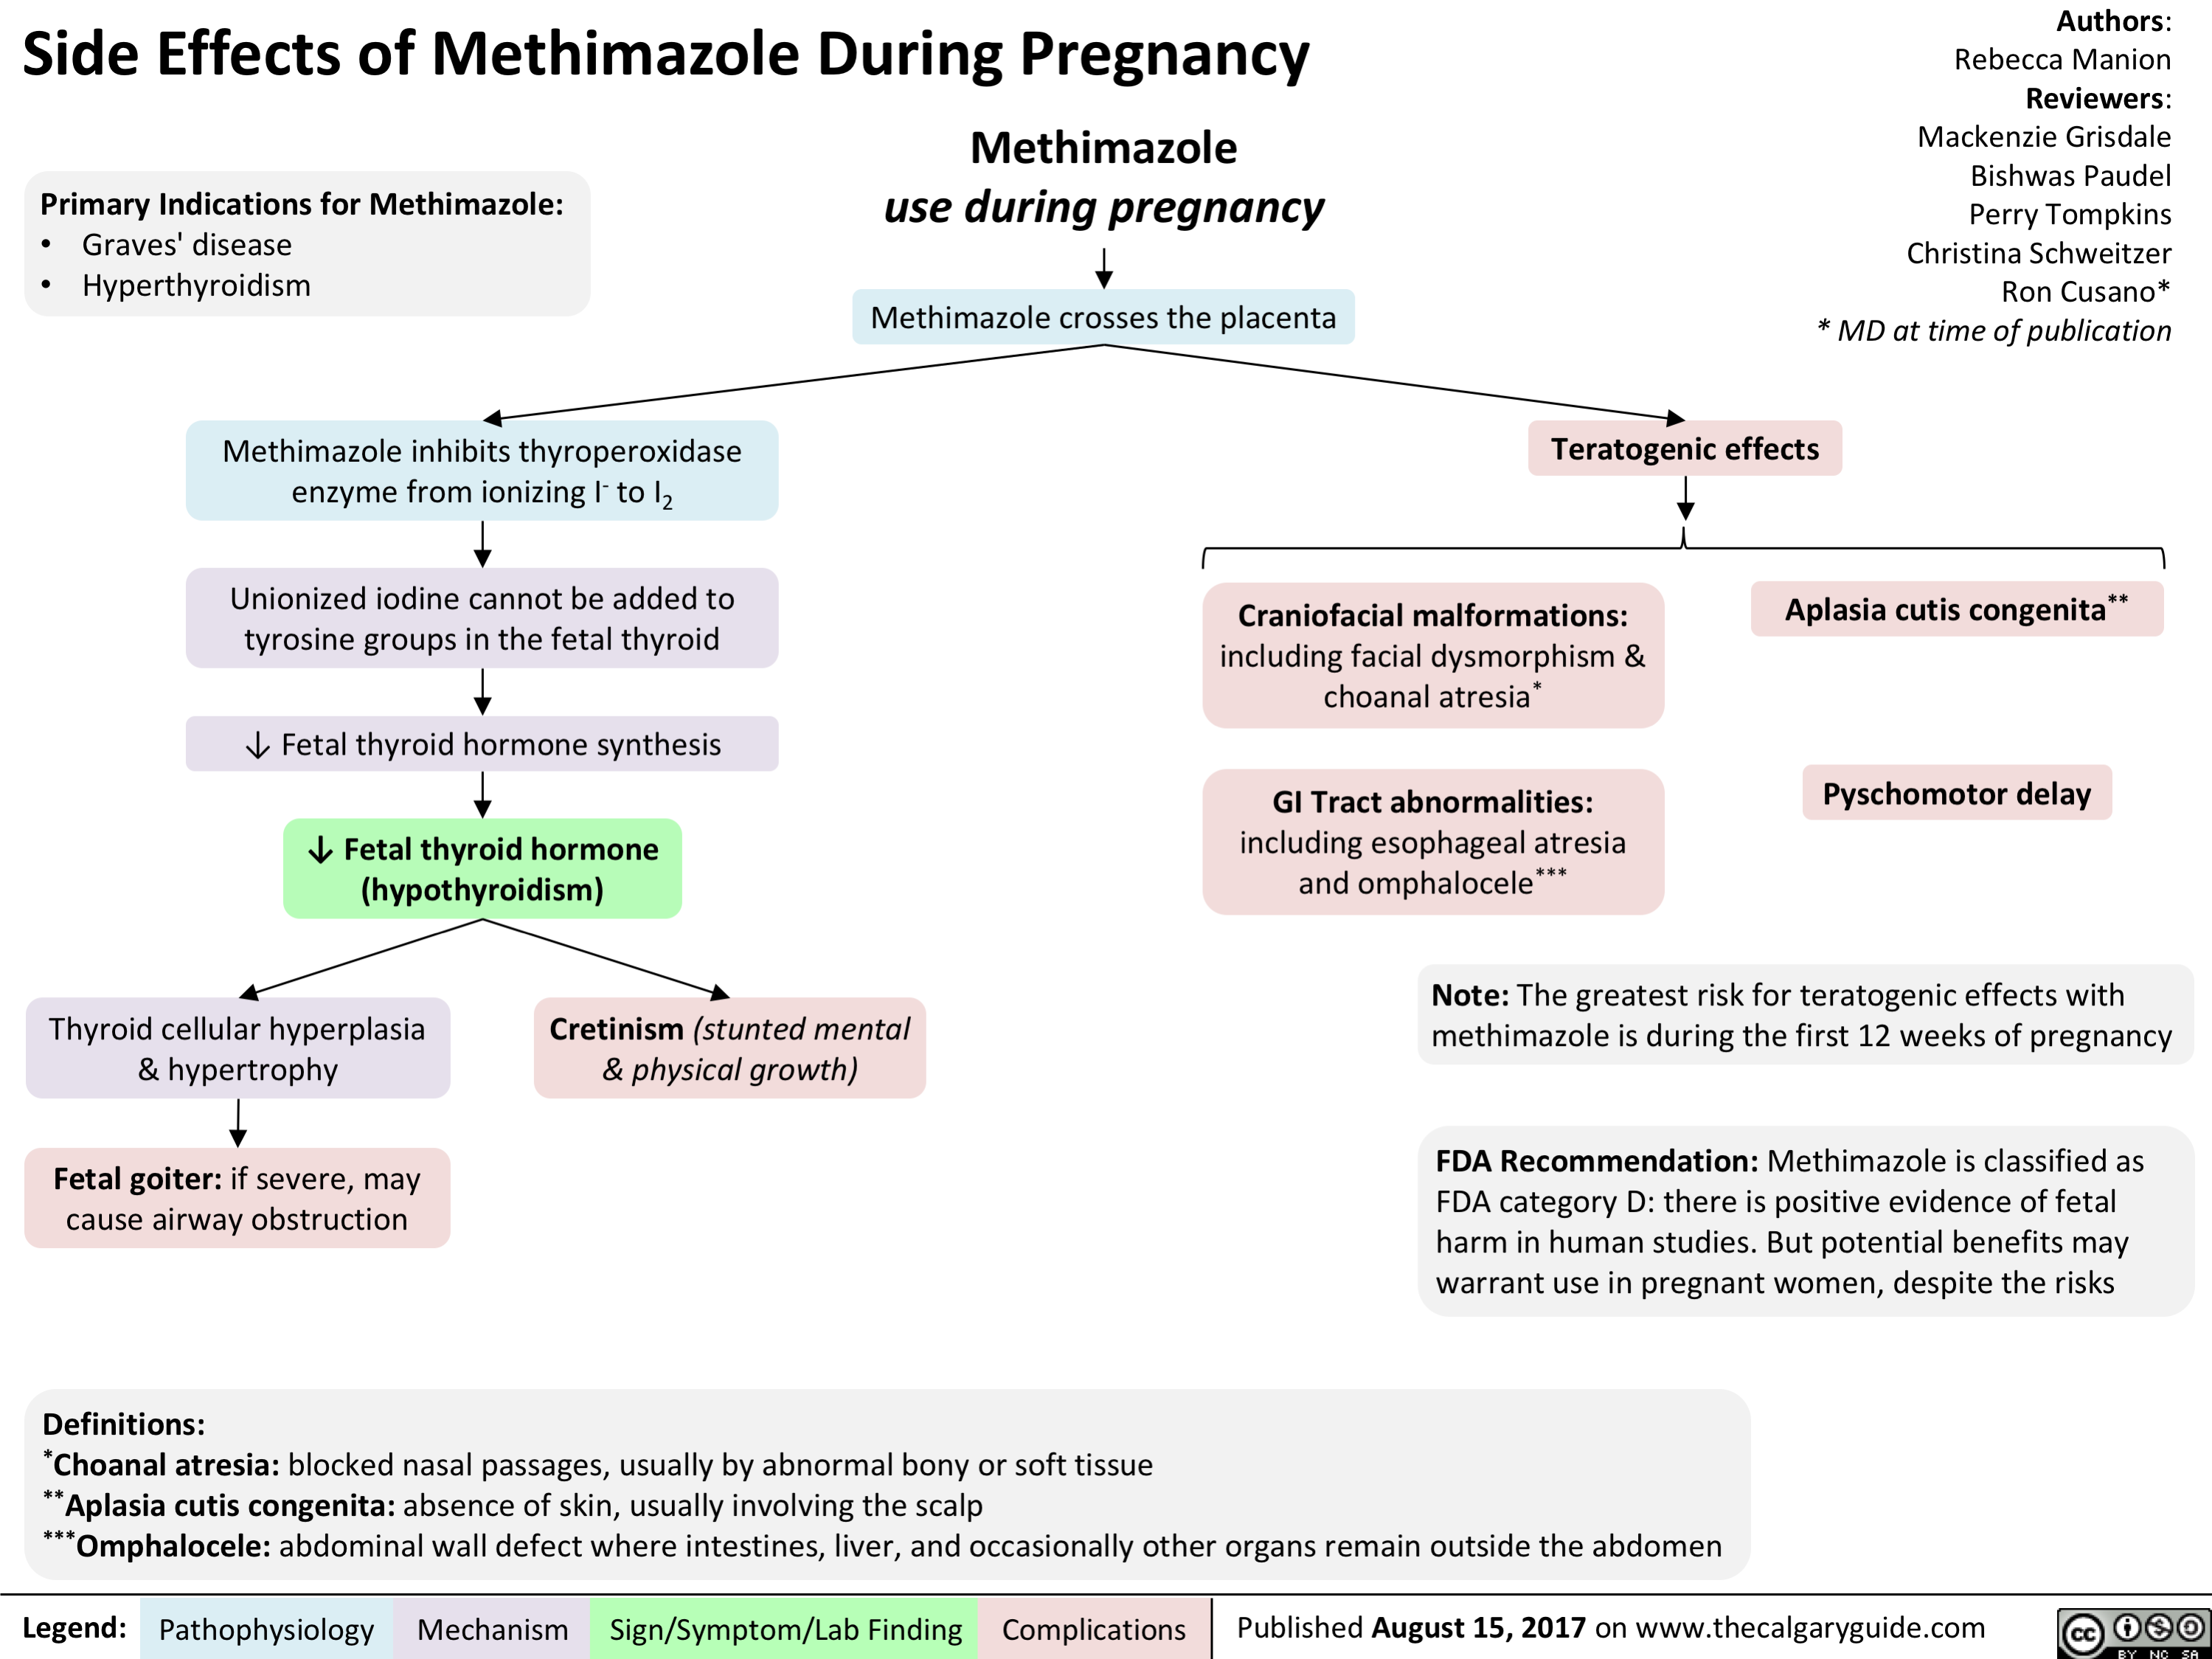 Side Effects Of Methimazole During Pregnancy Calgary Guide